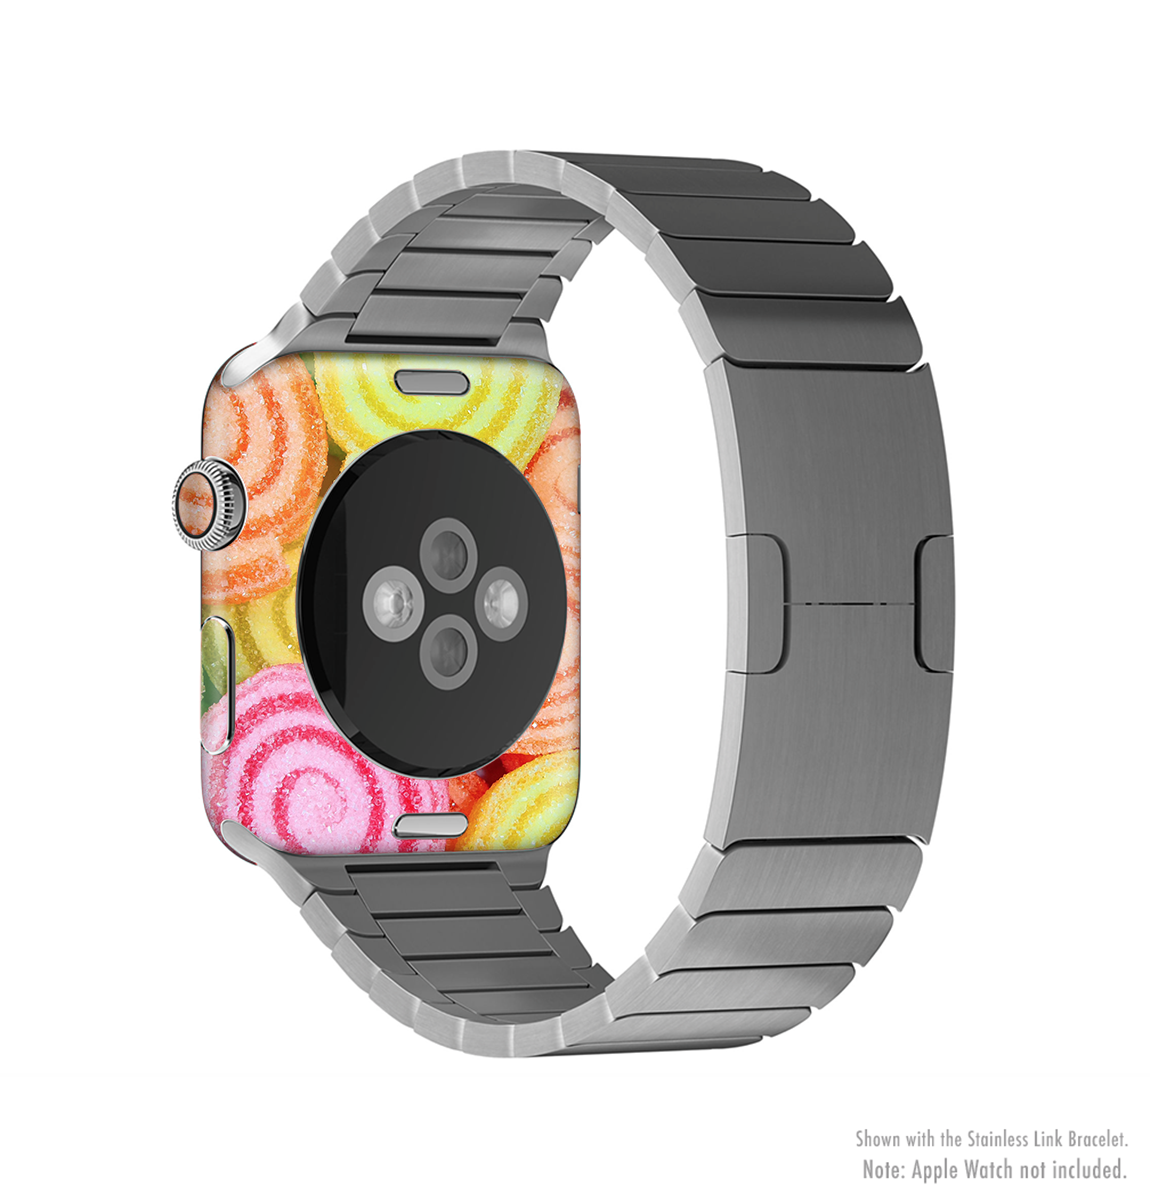 The Colorful Candy Swirls Full-Body Skin Kit for the Apple Watch